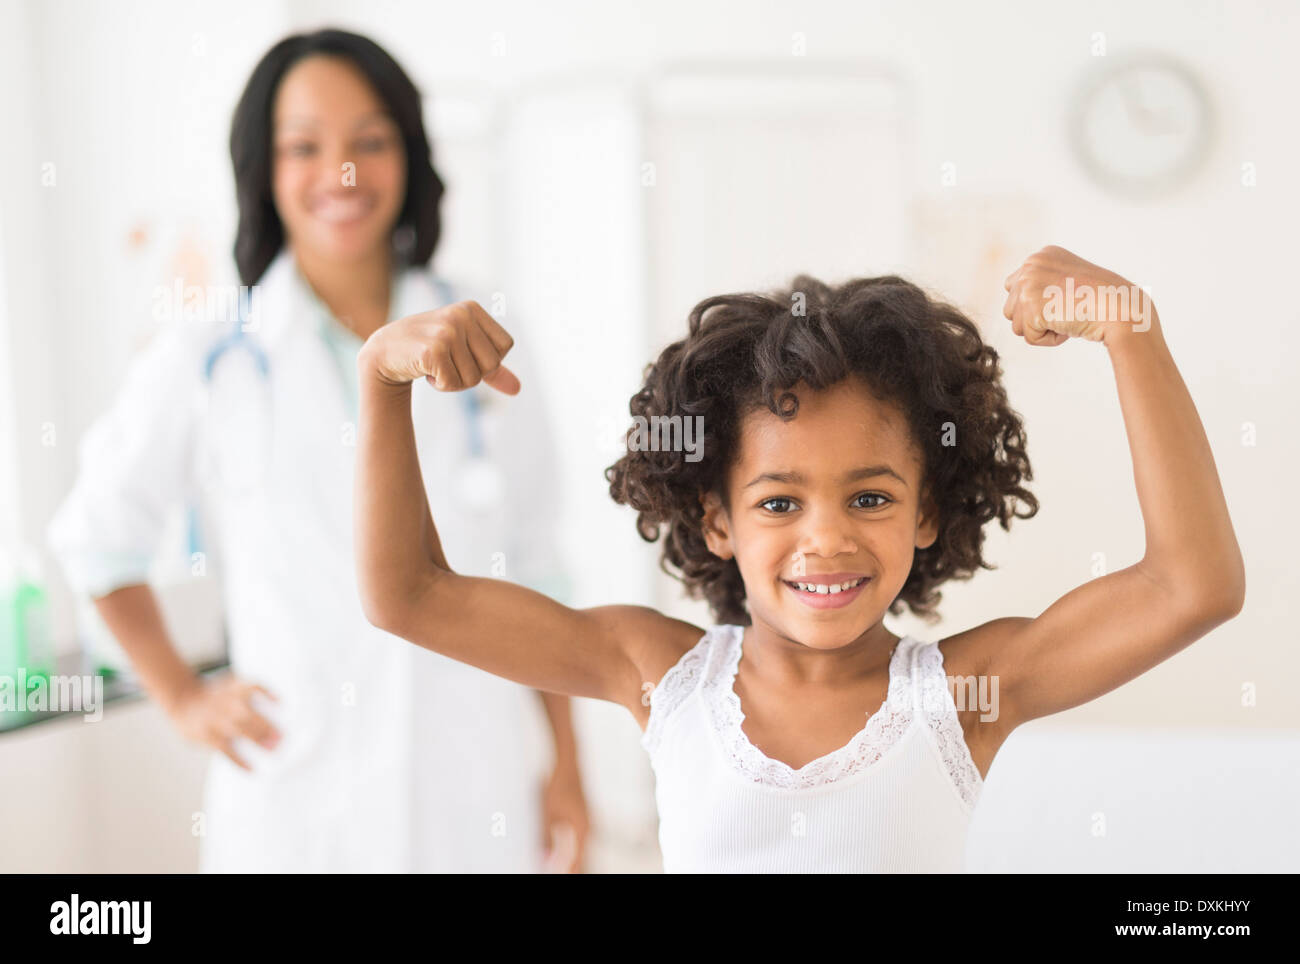 Portrait of African American girl flexing muscles in doctor's office Stock Photo